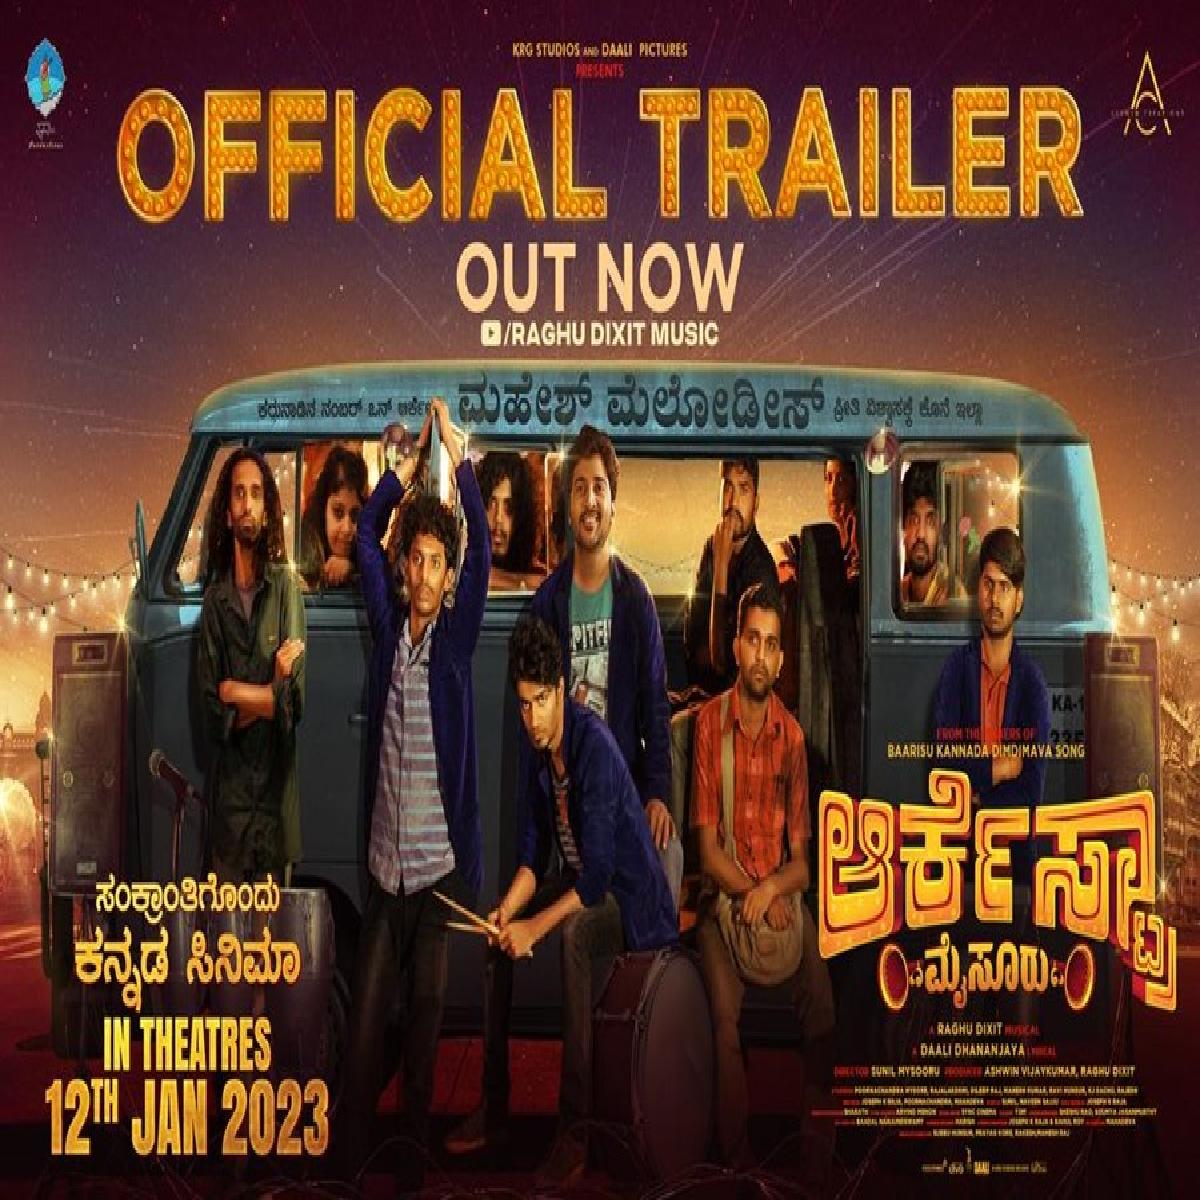 Orchestra Mysuru Trailer Is Out Now